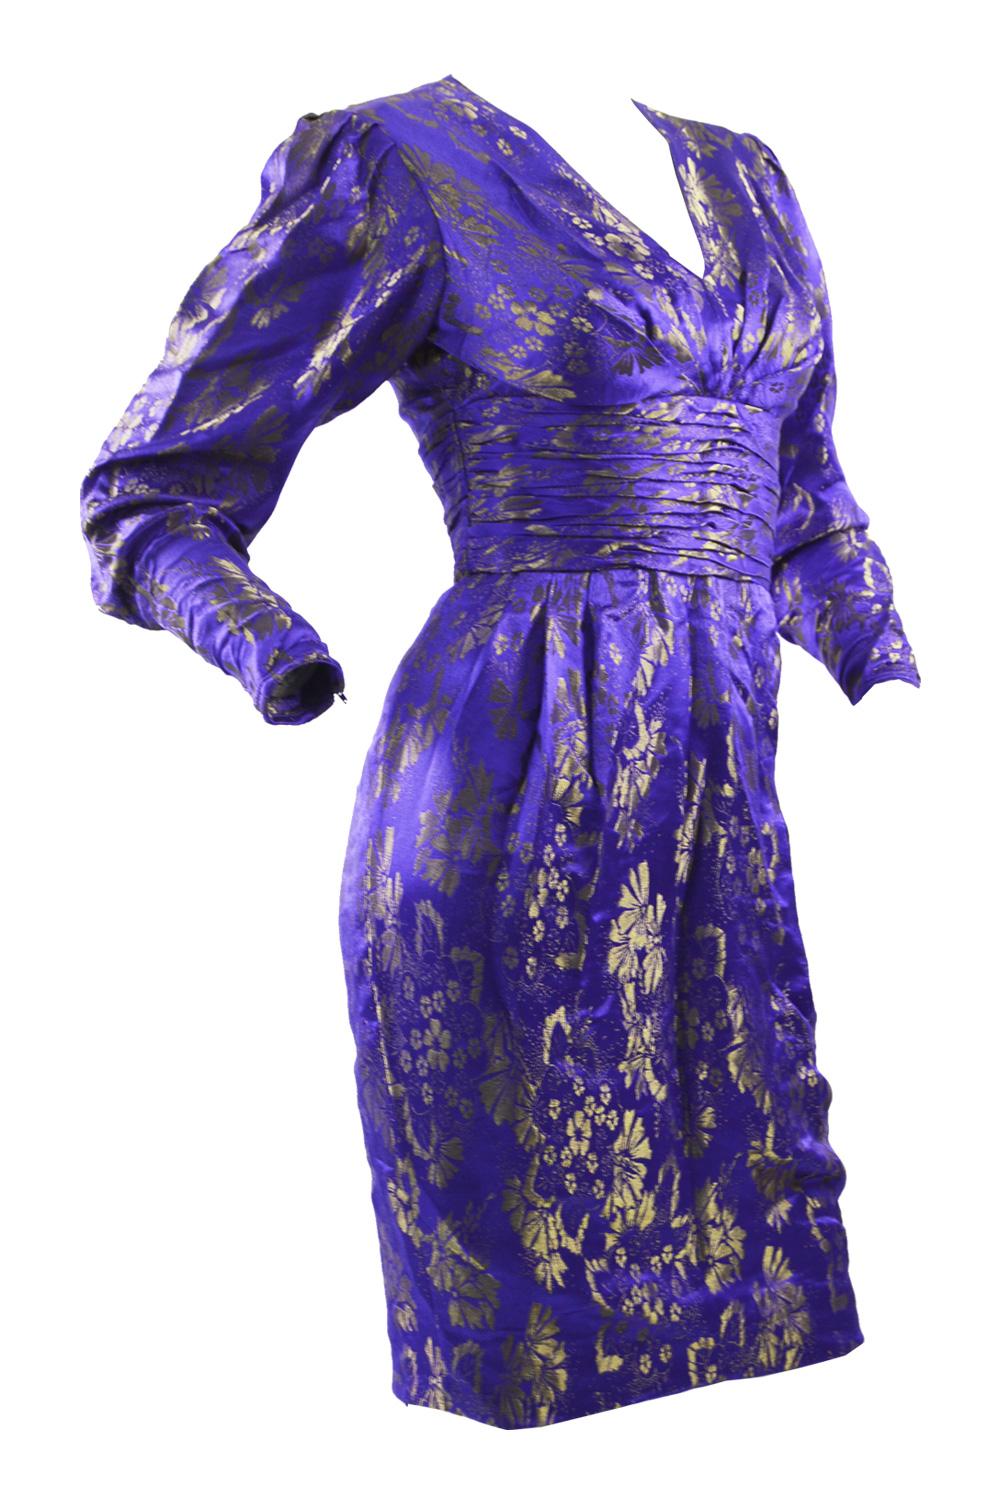 A fabulous vintage Emanuel Ungaro blue and gold silk brocade party/ evening dress from the 1980s with mutton sleeves and draping at the waist. 

Size: Marked UK 6 which is roughly a US 2/ EU 34. Please check measurements. 
Bust - 32” / 81cm
Waist -